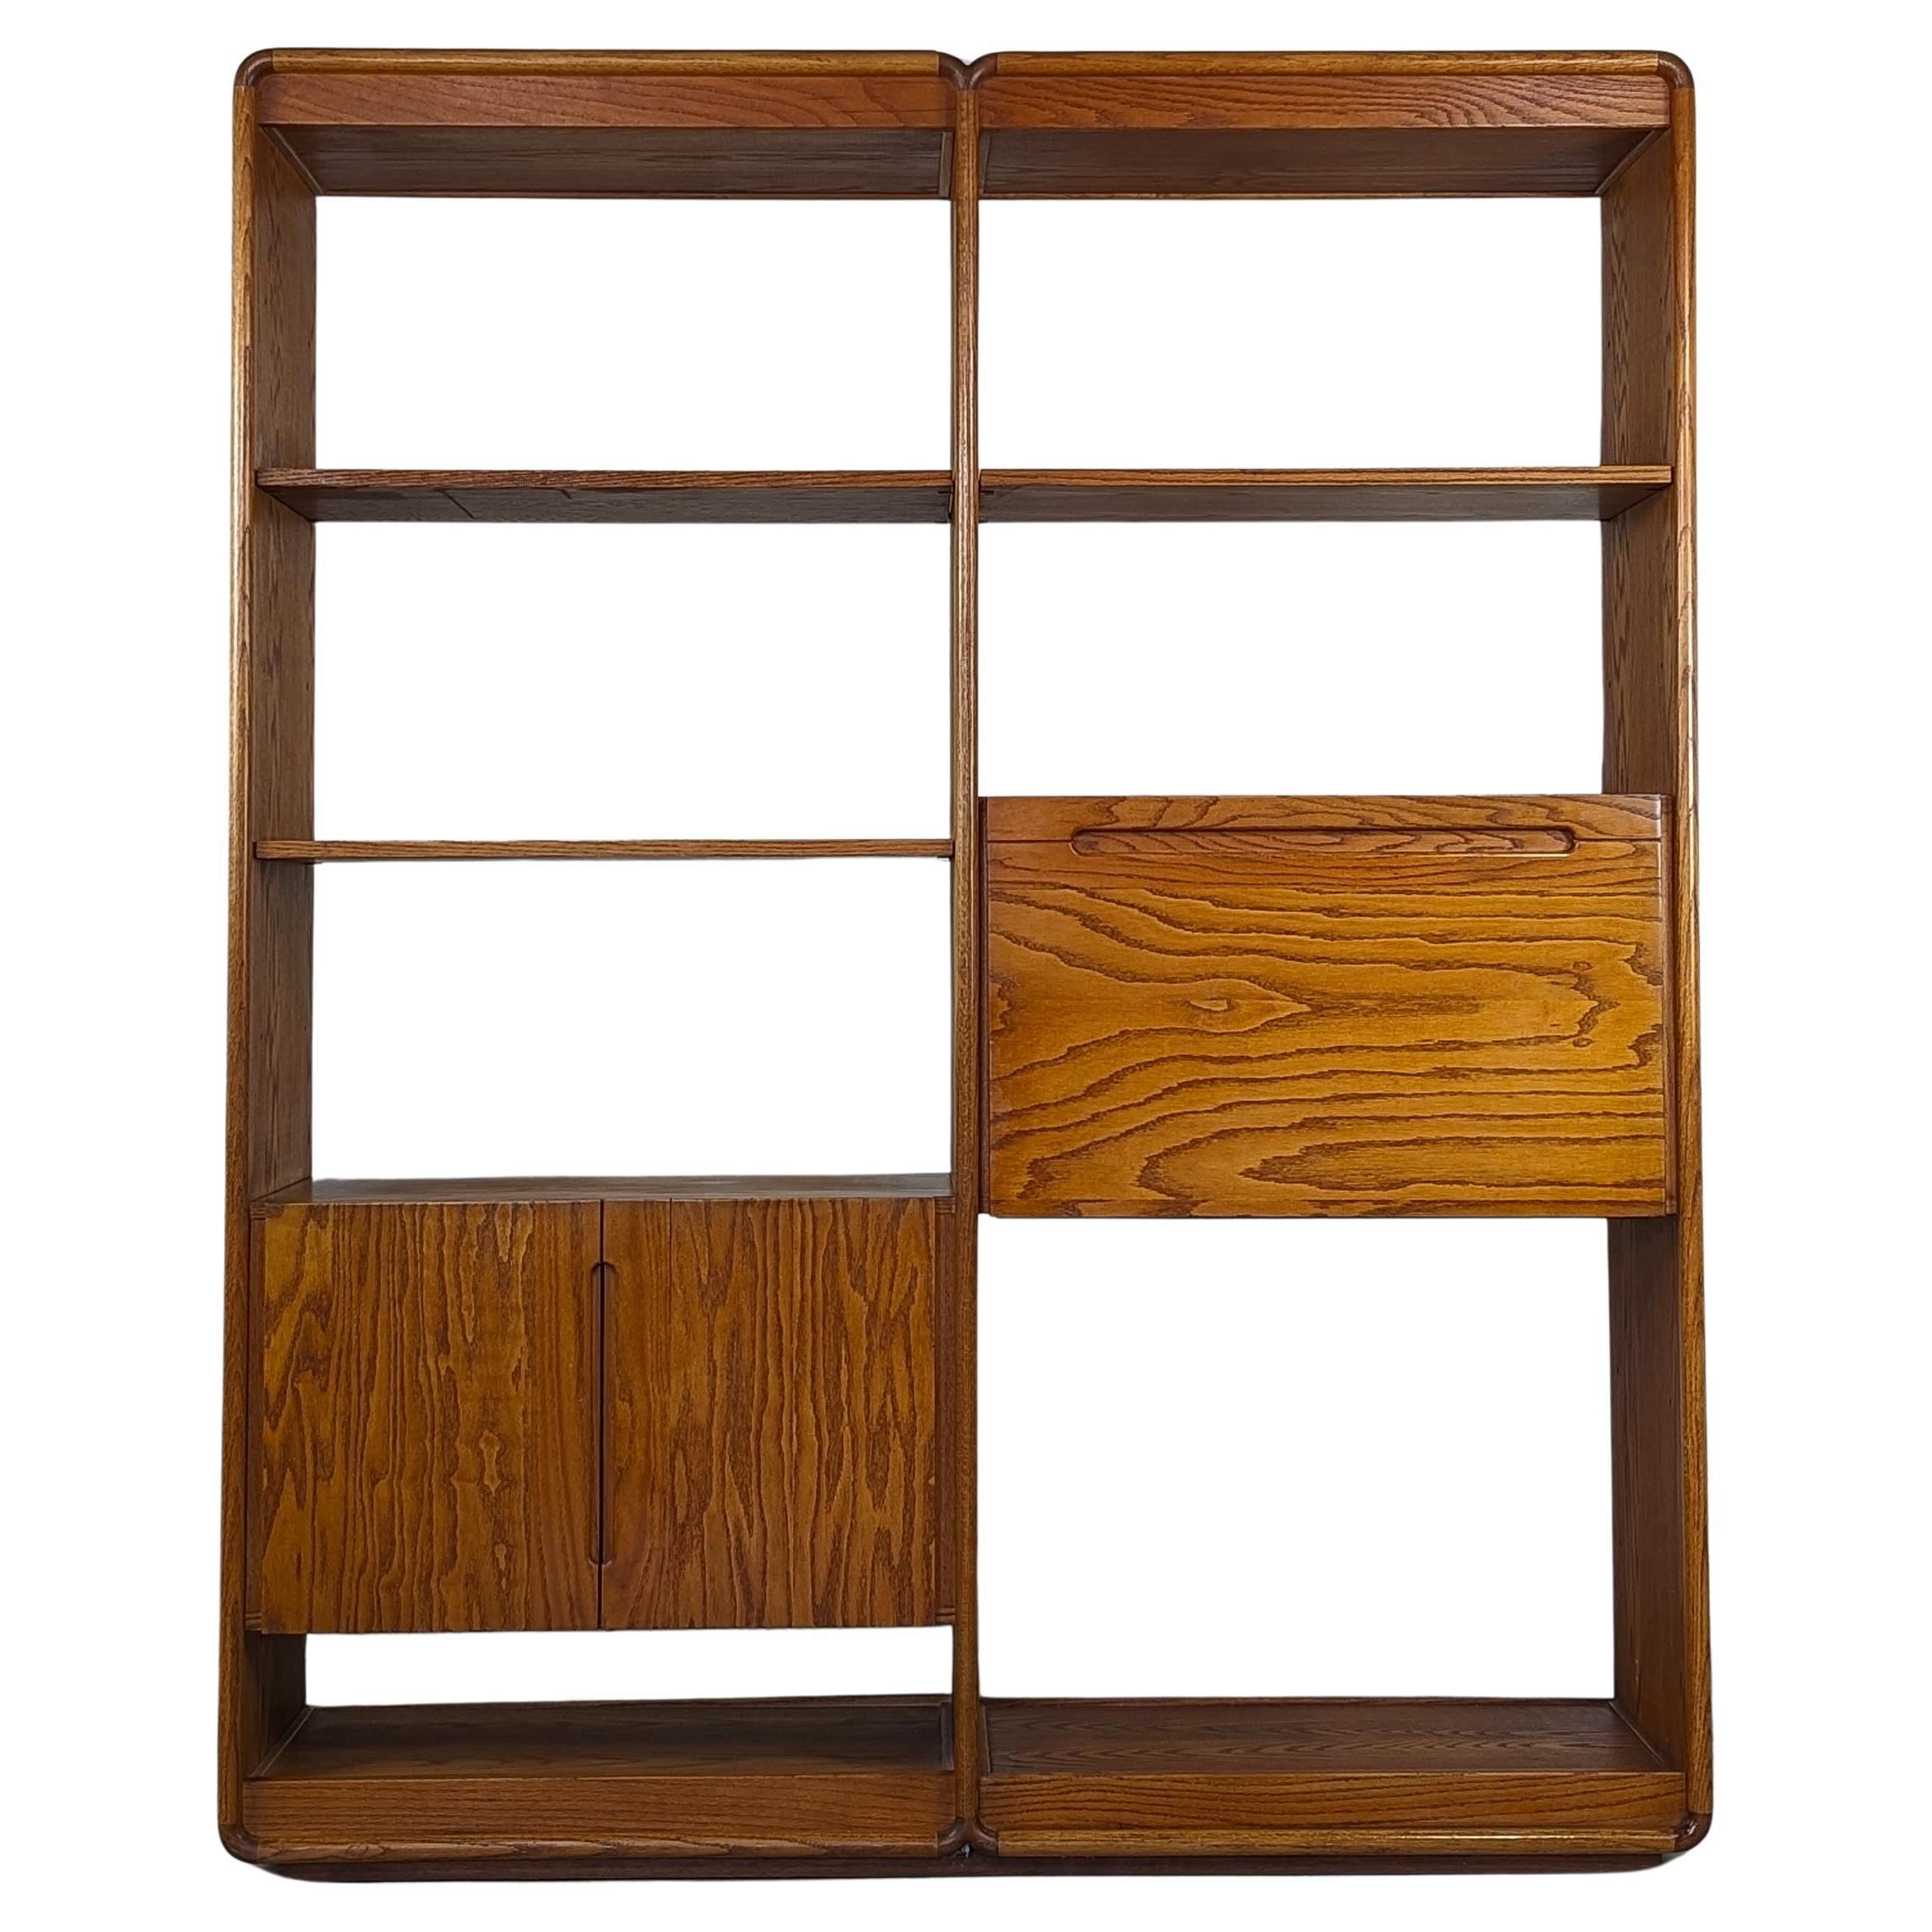 Double Bay Mid Century Oak Freestanding Wall Unit Shelving/Bookcase by Lou Hodge